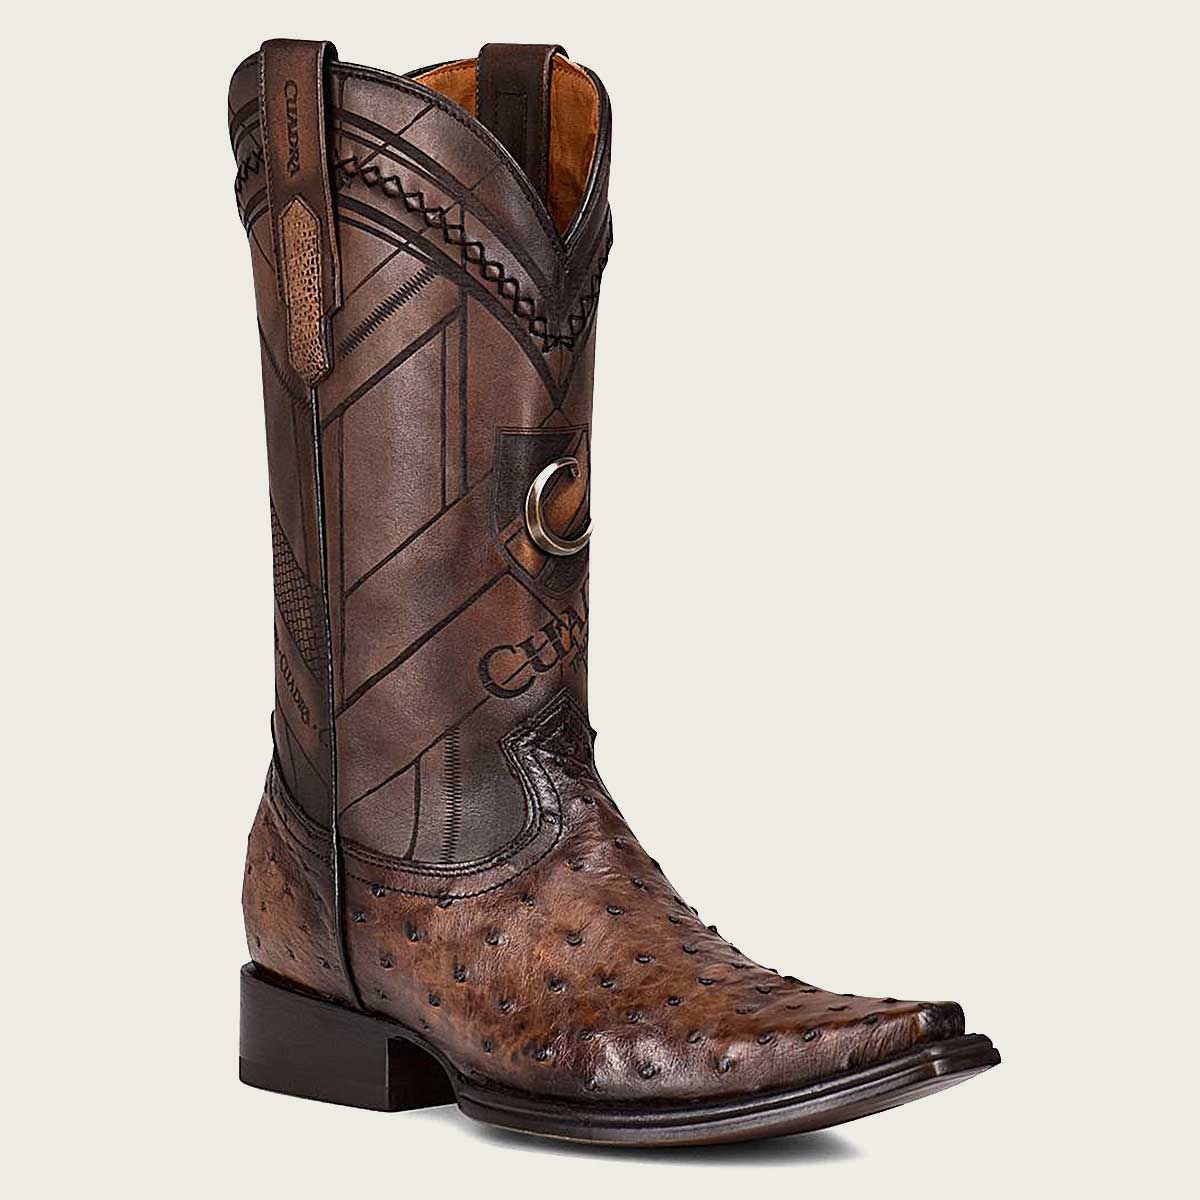 Elevate your shoe game with our exquisite men's traditional engraved dark brown leather boot crafted from genuine ostrich and bovine leather.